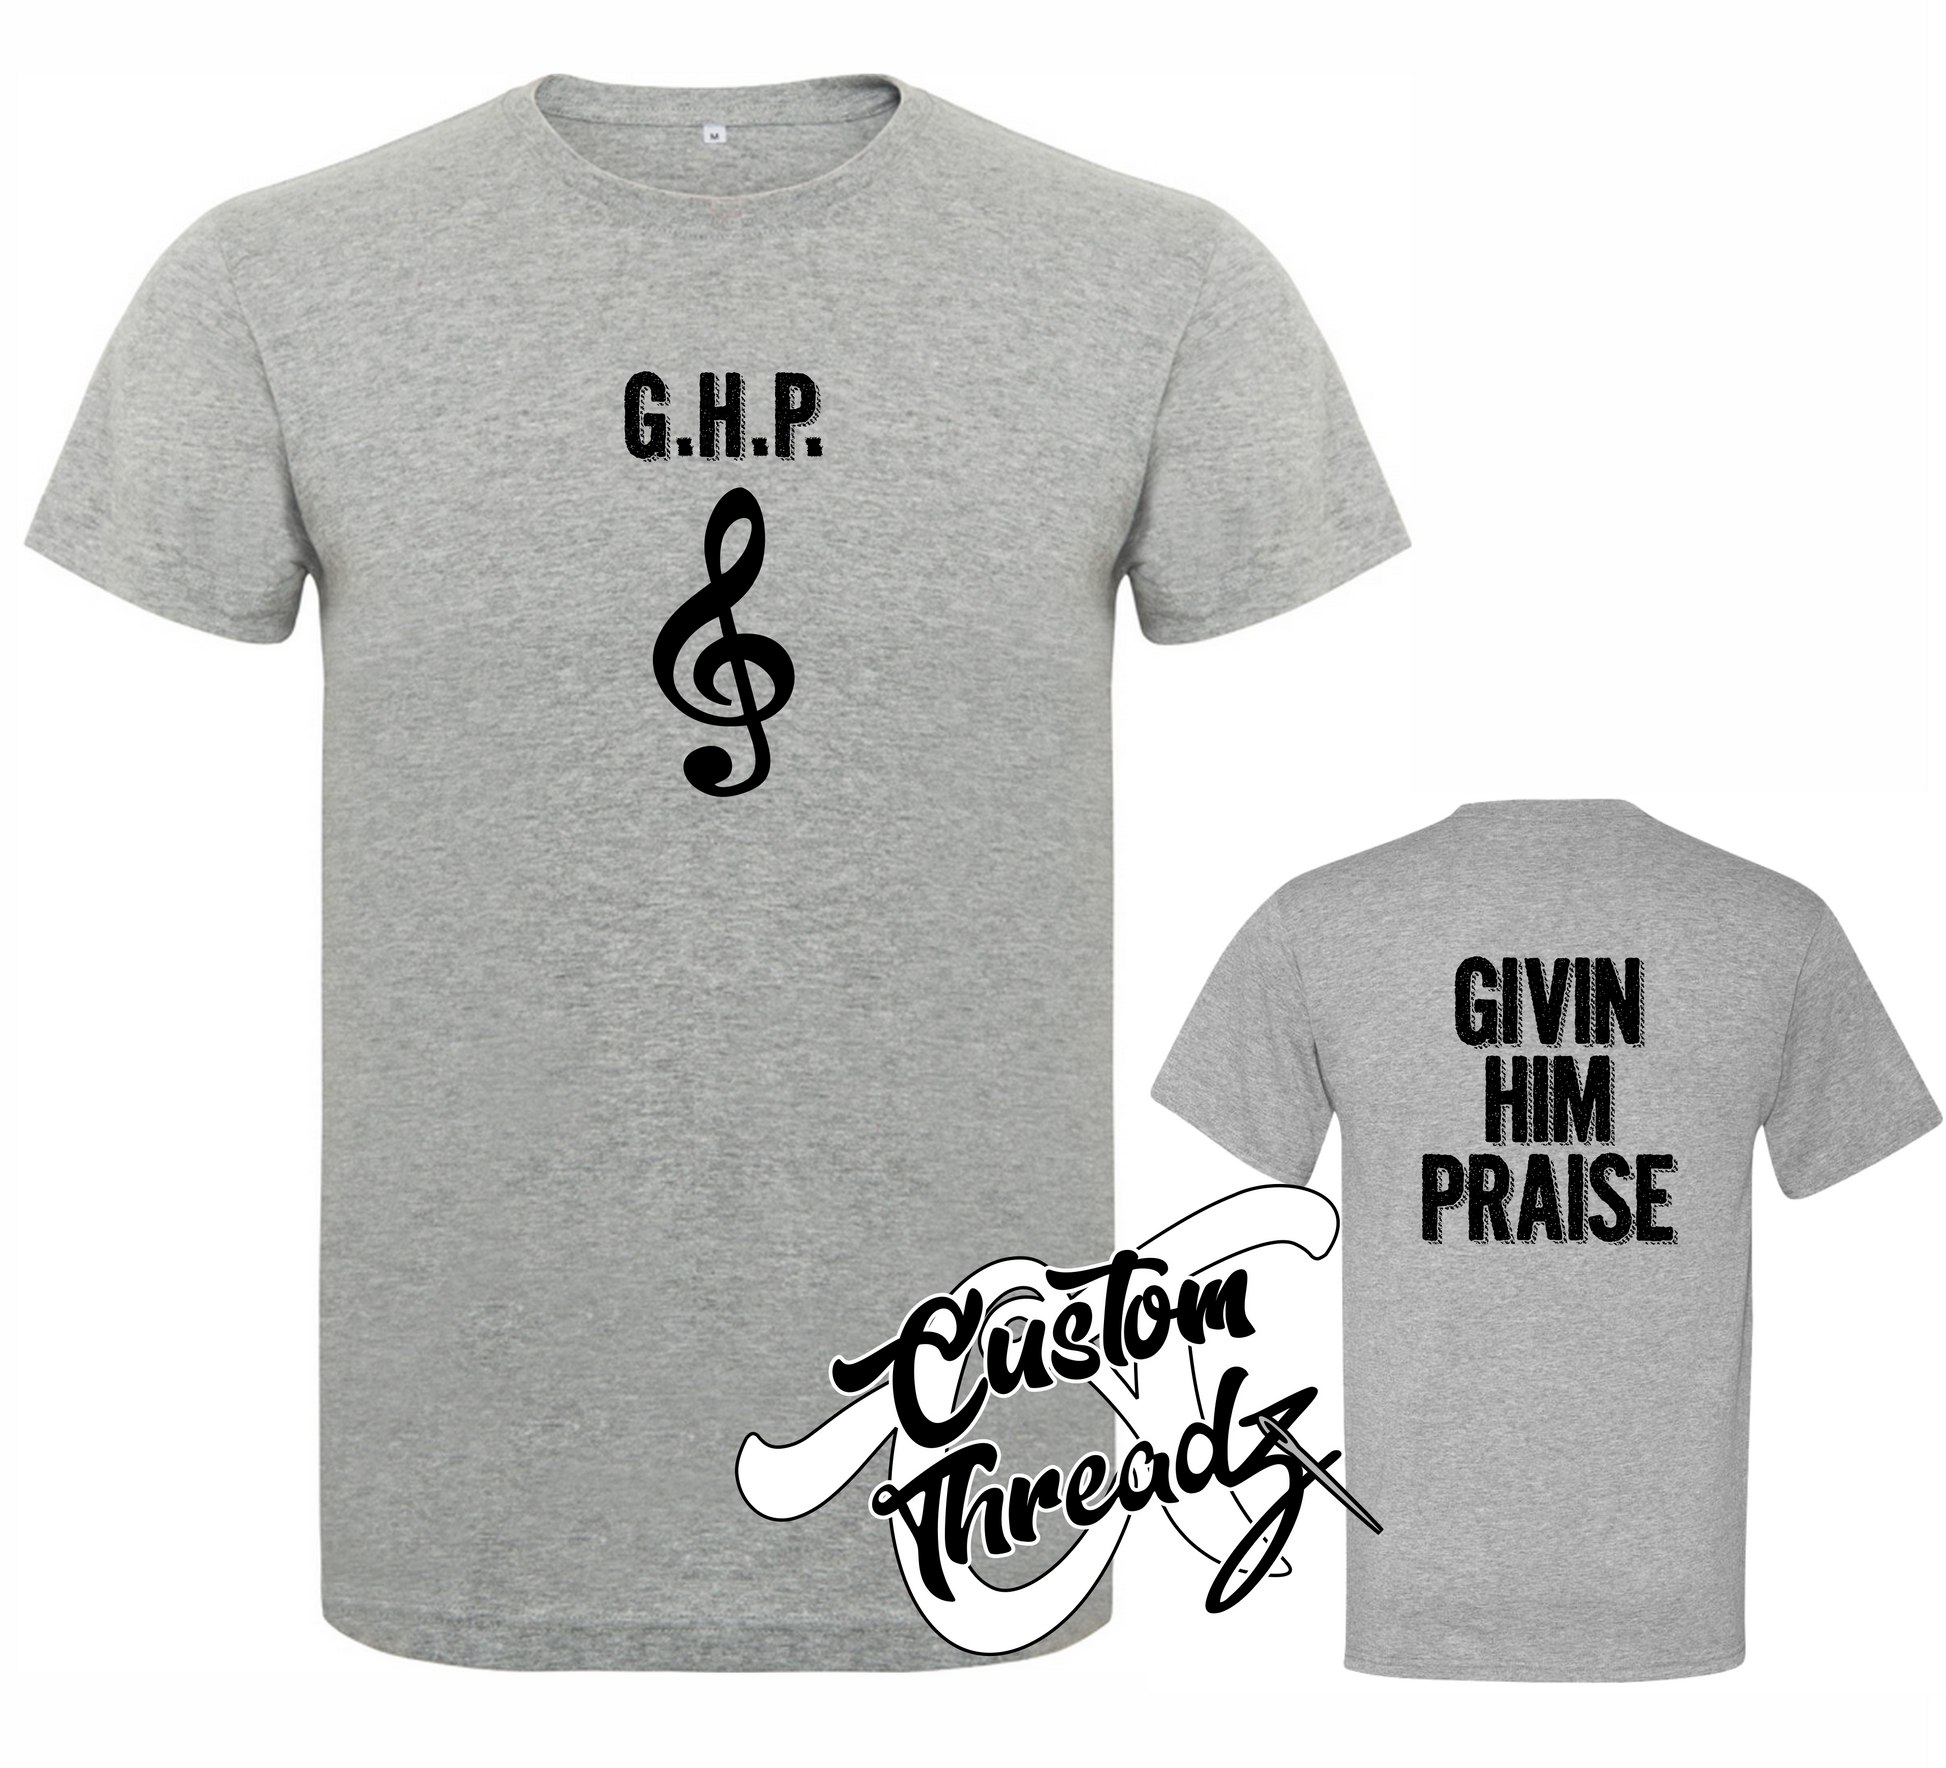 giving him praise music note DTG printed design athletic heather tee